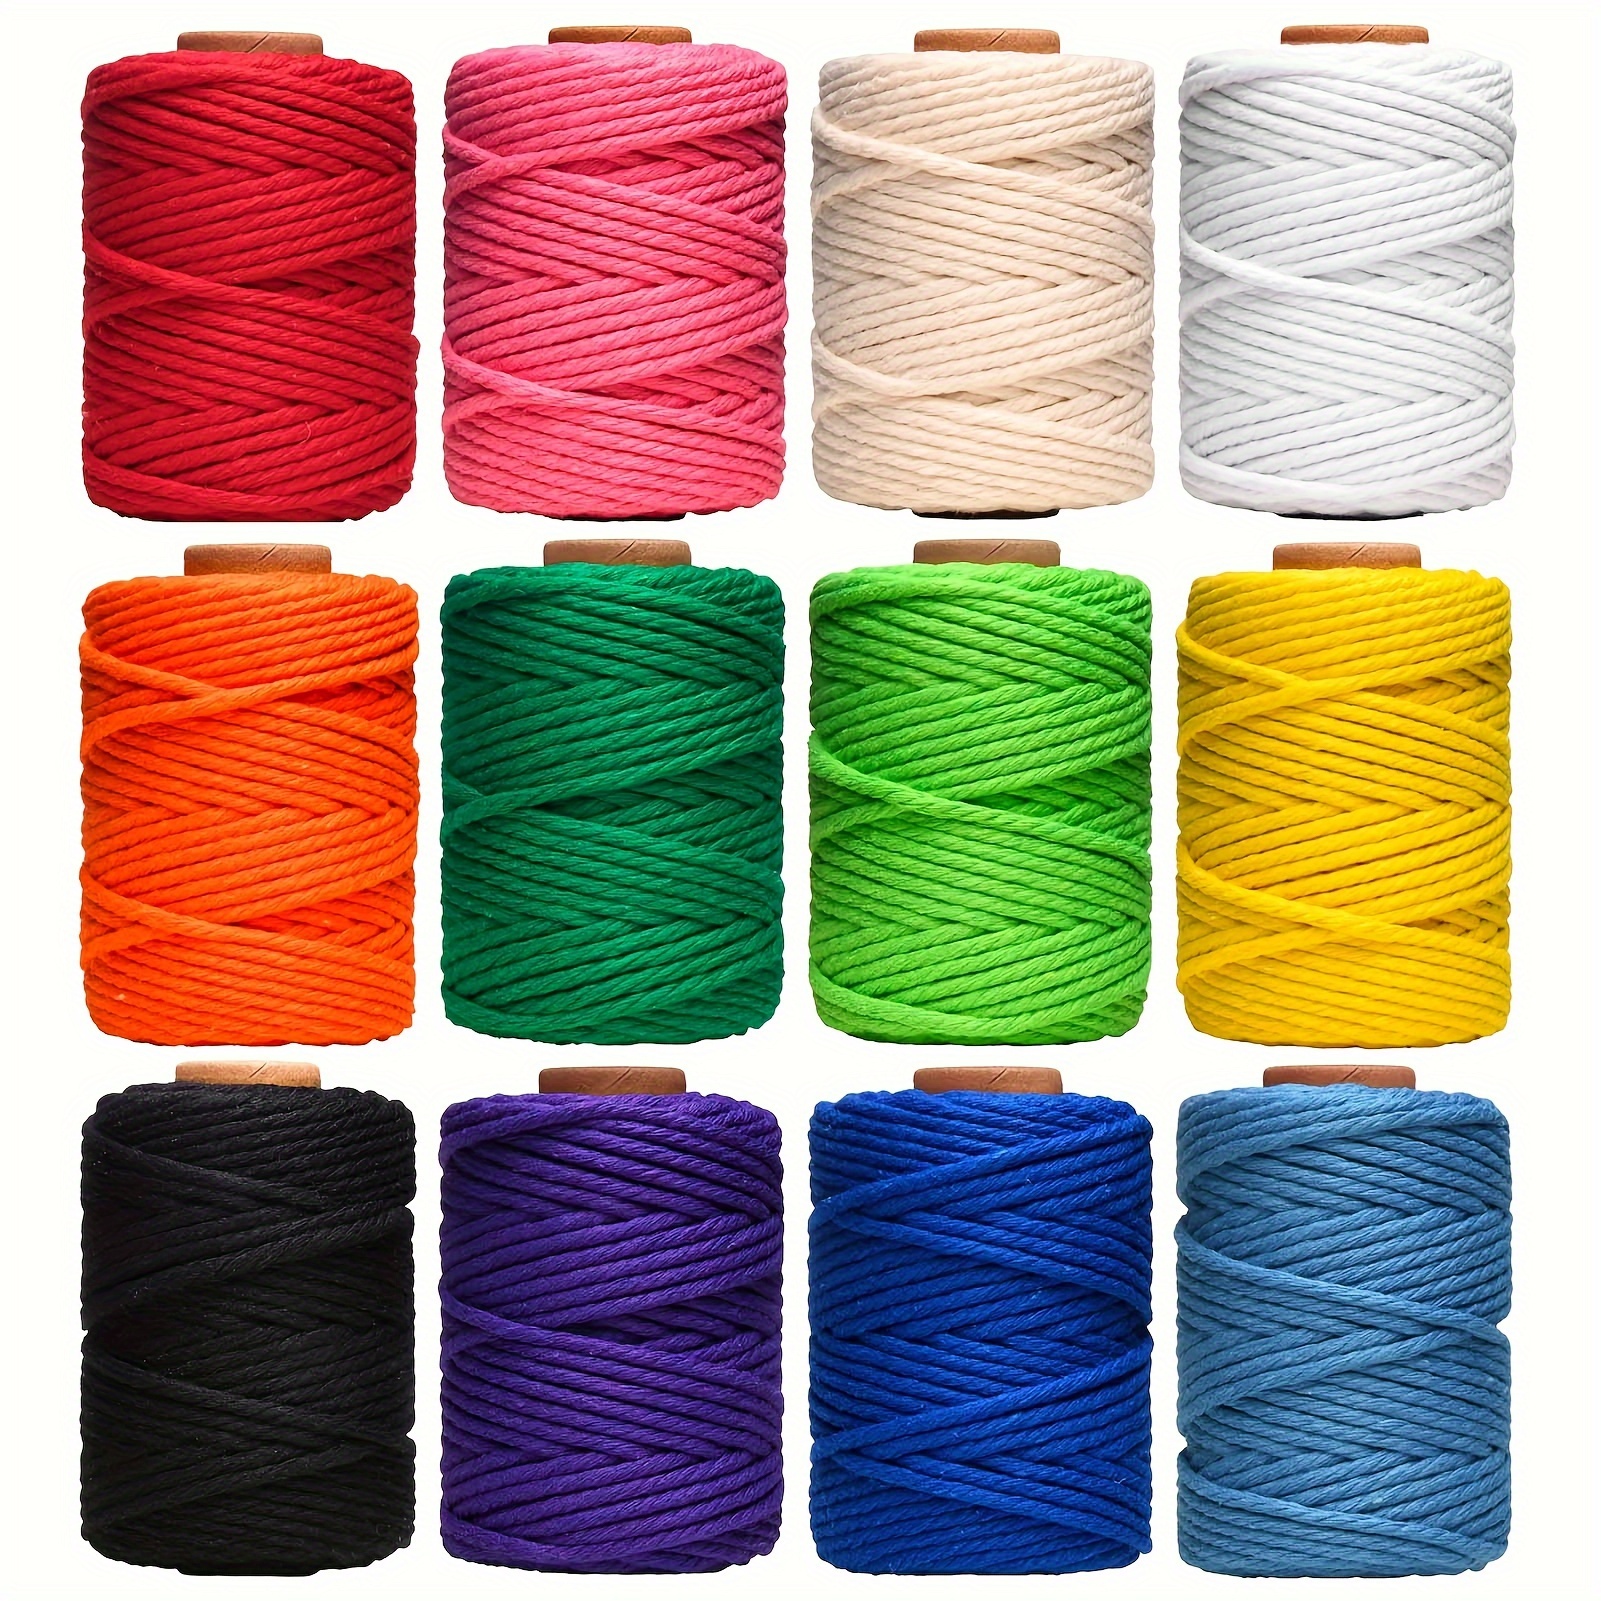 

12-pack Multicolor Cotton Macrame Cord, 3mm X 396 Yards Each - Durable 4-strand Braided Rope For Diy Crafts, Wall Hangings, Plant Hangers & Gift Wrapping Nylon Cord Nylon Cord For Jewelry Making